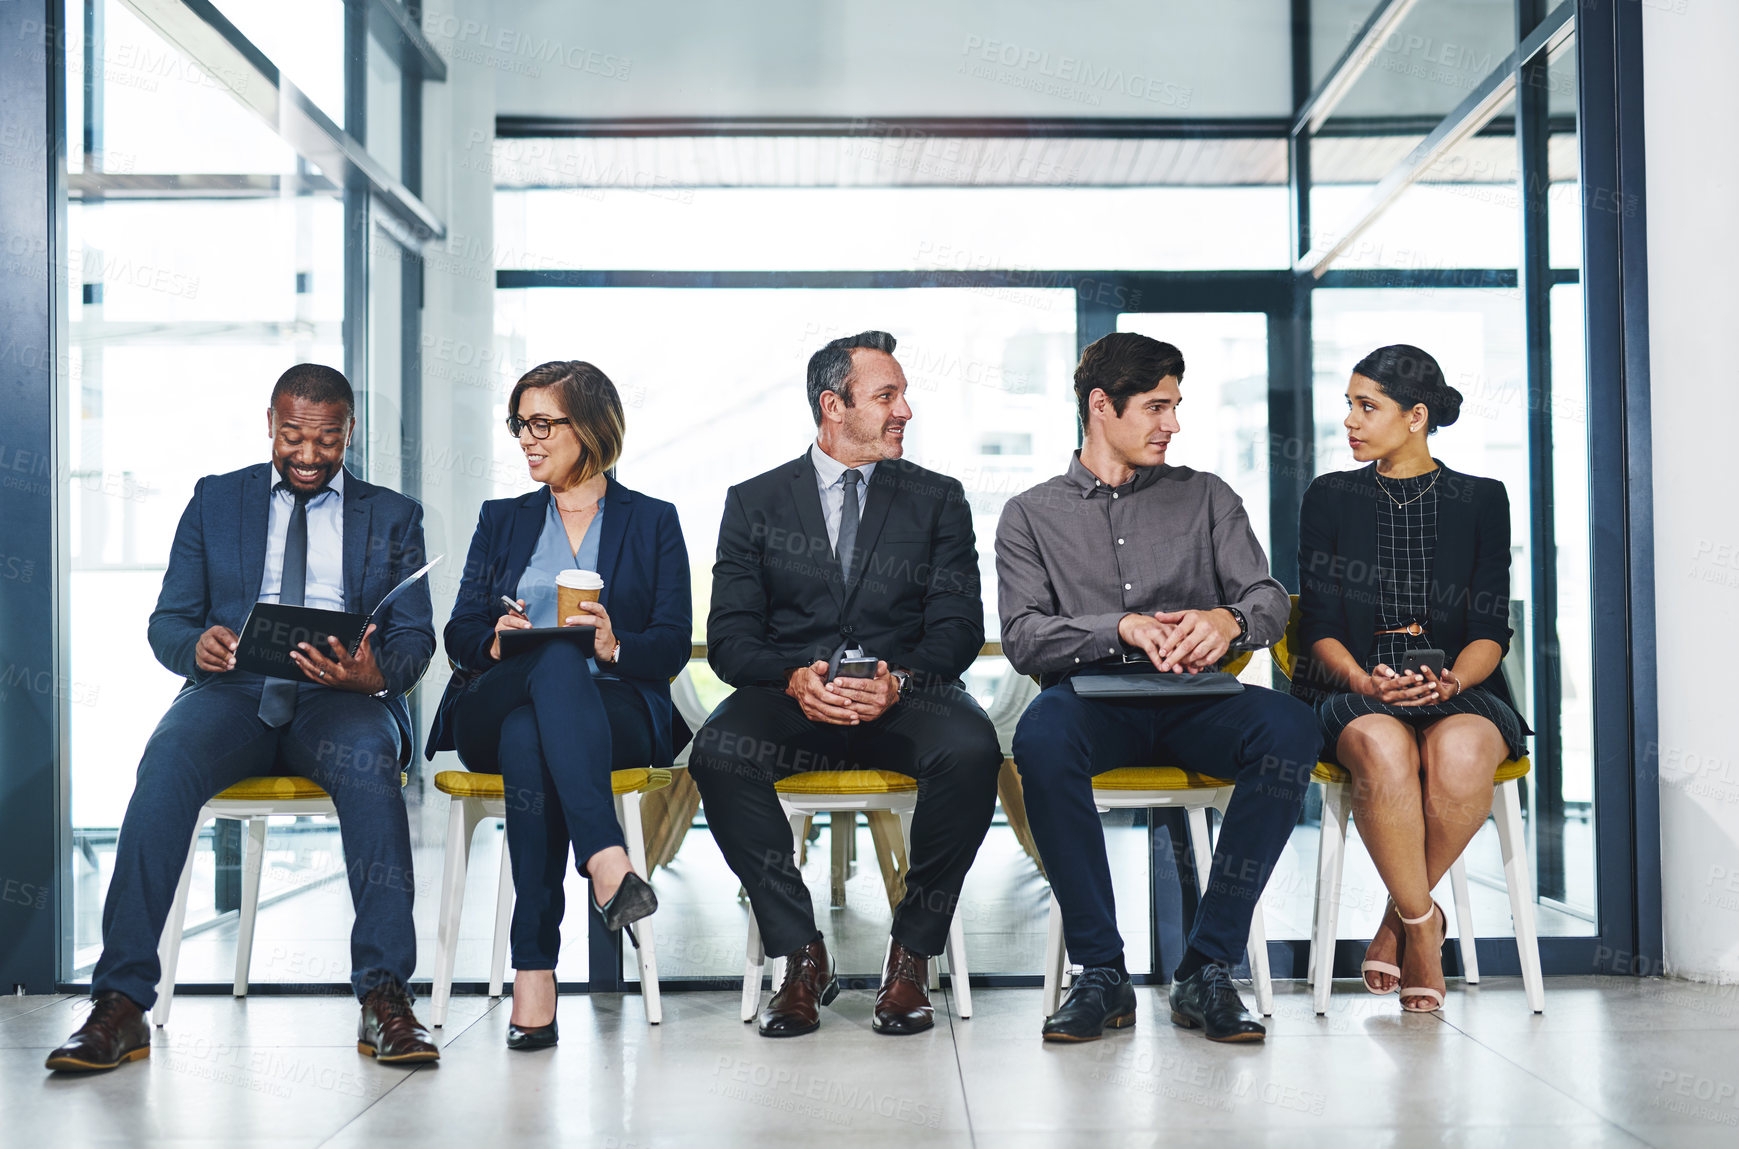 Buy stock photo Full length shot of a diverse group of businesspeople conversing with each other while sitting in line for an interview in a modern office